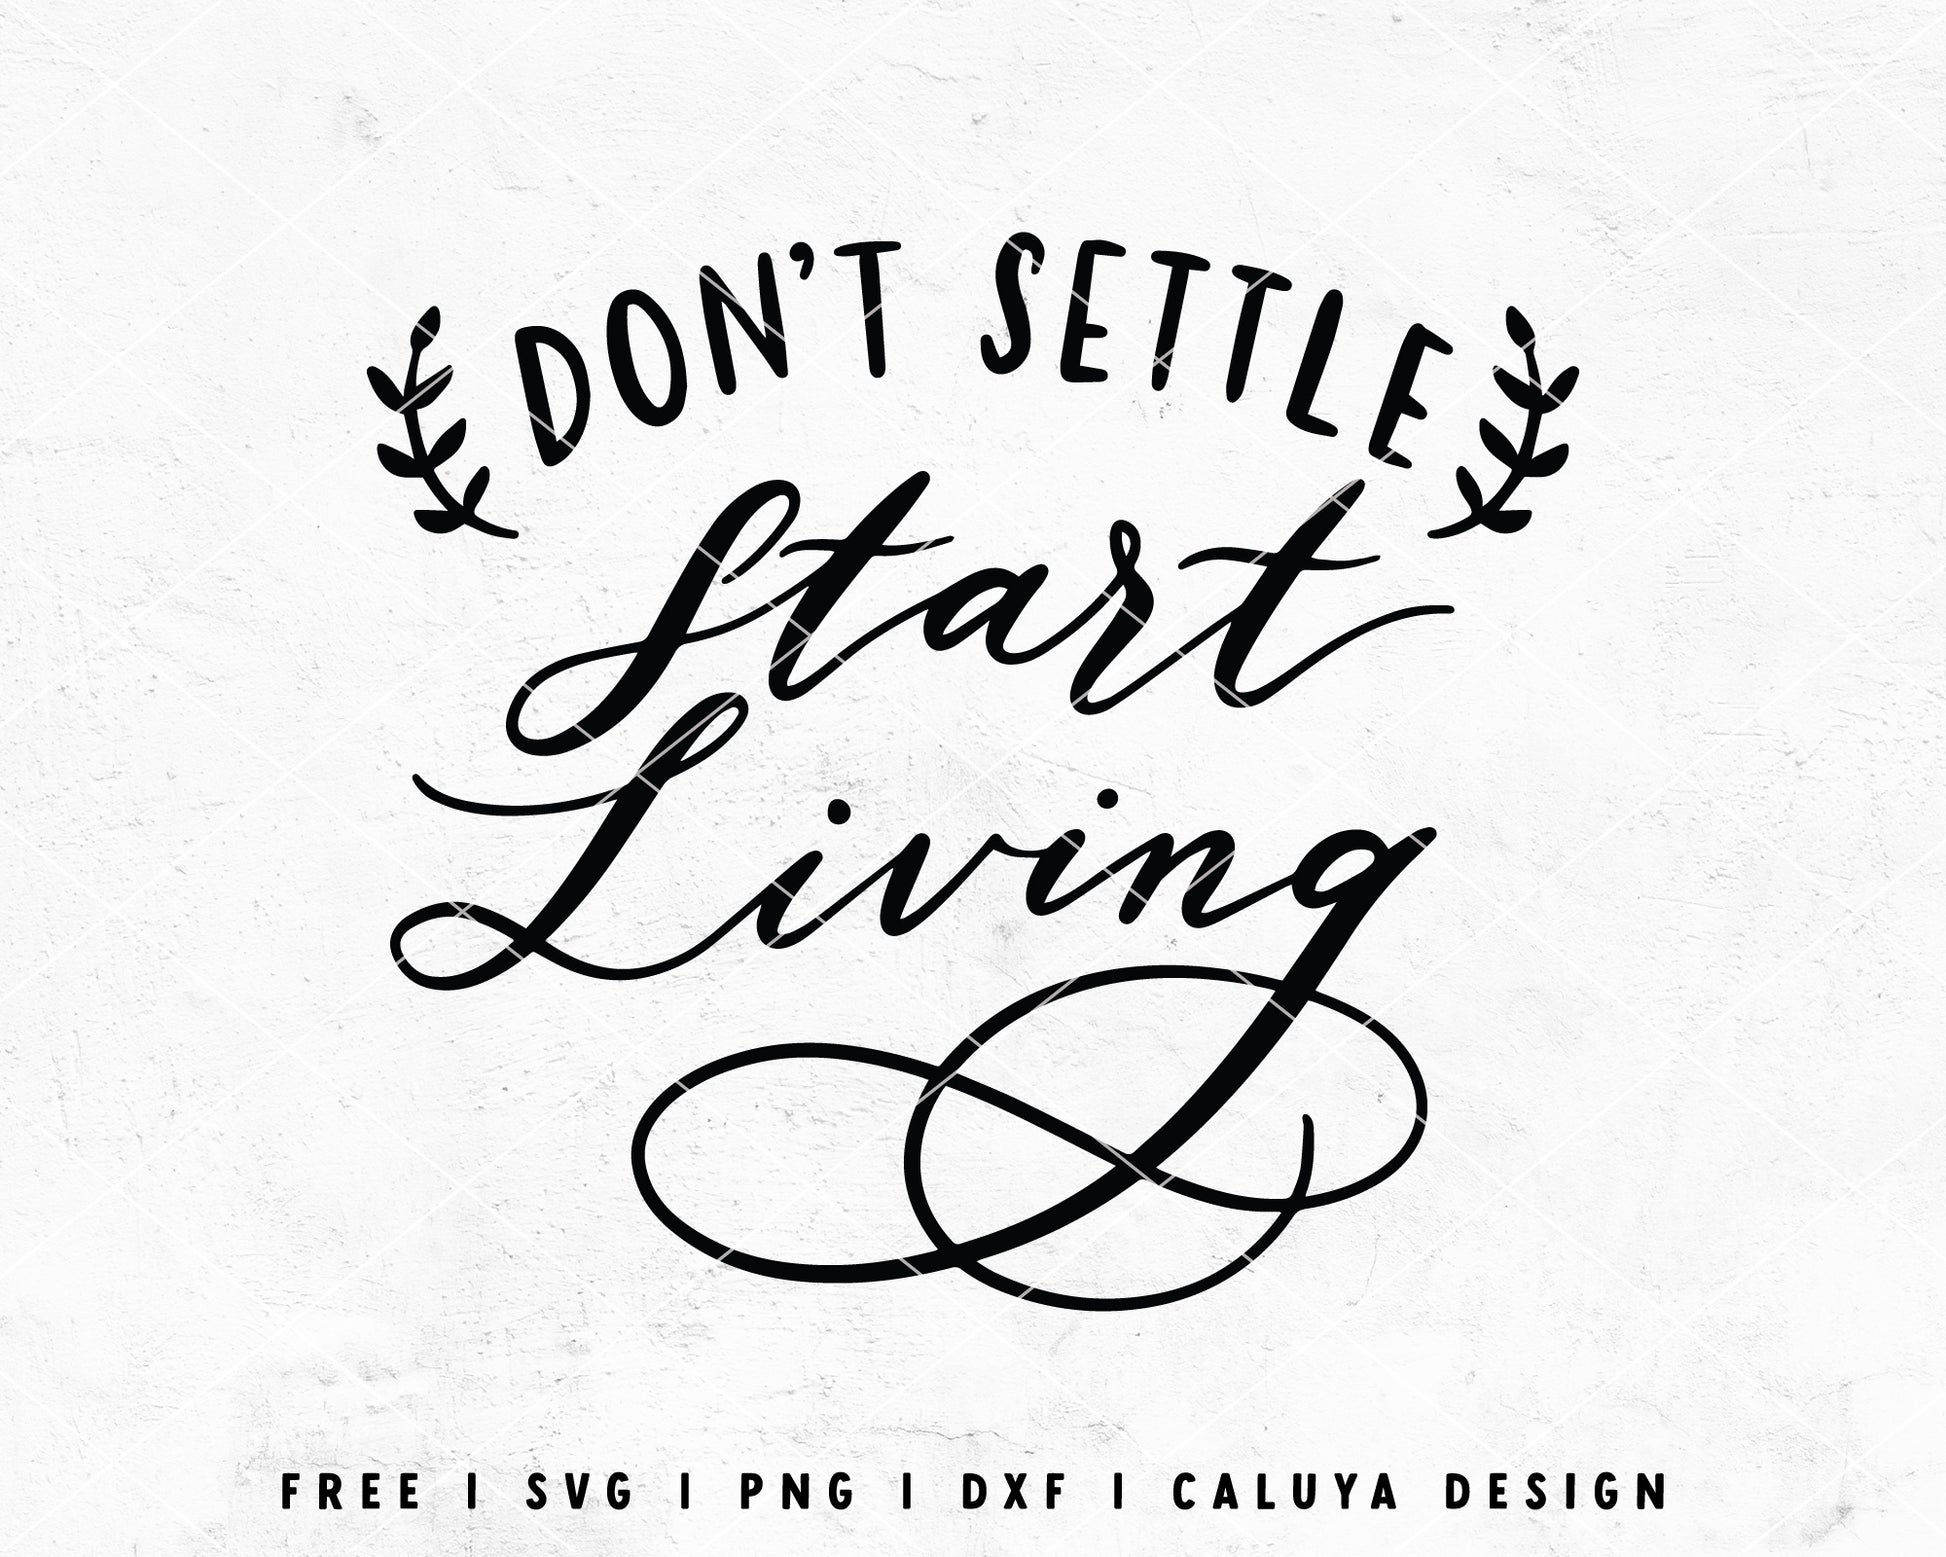 FREE Inspirational Quote SVG | Start Living SVG Cut File for Cricut, Cameo Silhouette | Free SVG Cut File